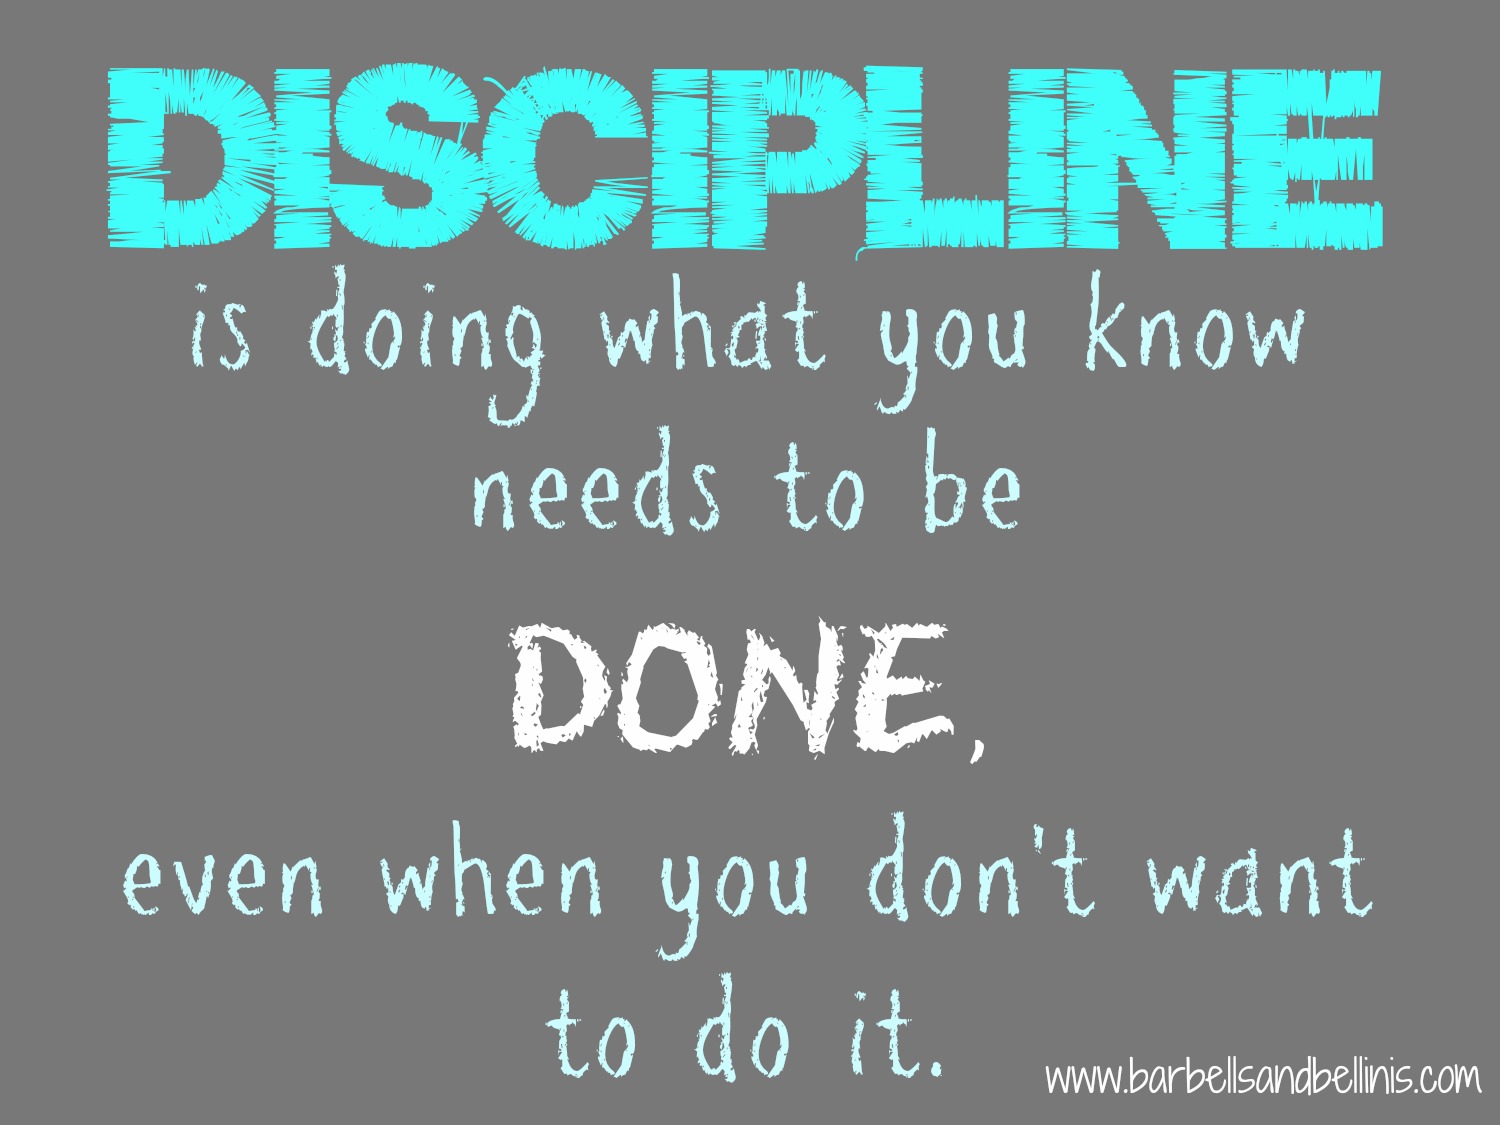 MOTIVATIONAL WALLPAPER ON DISCIPLINE DOING WHAT YOU KNOW